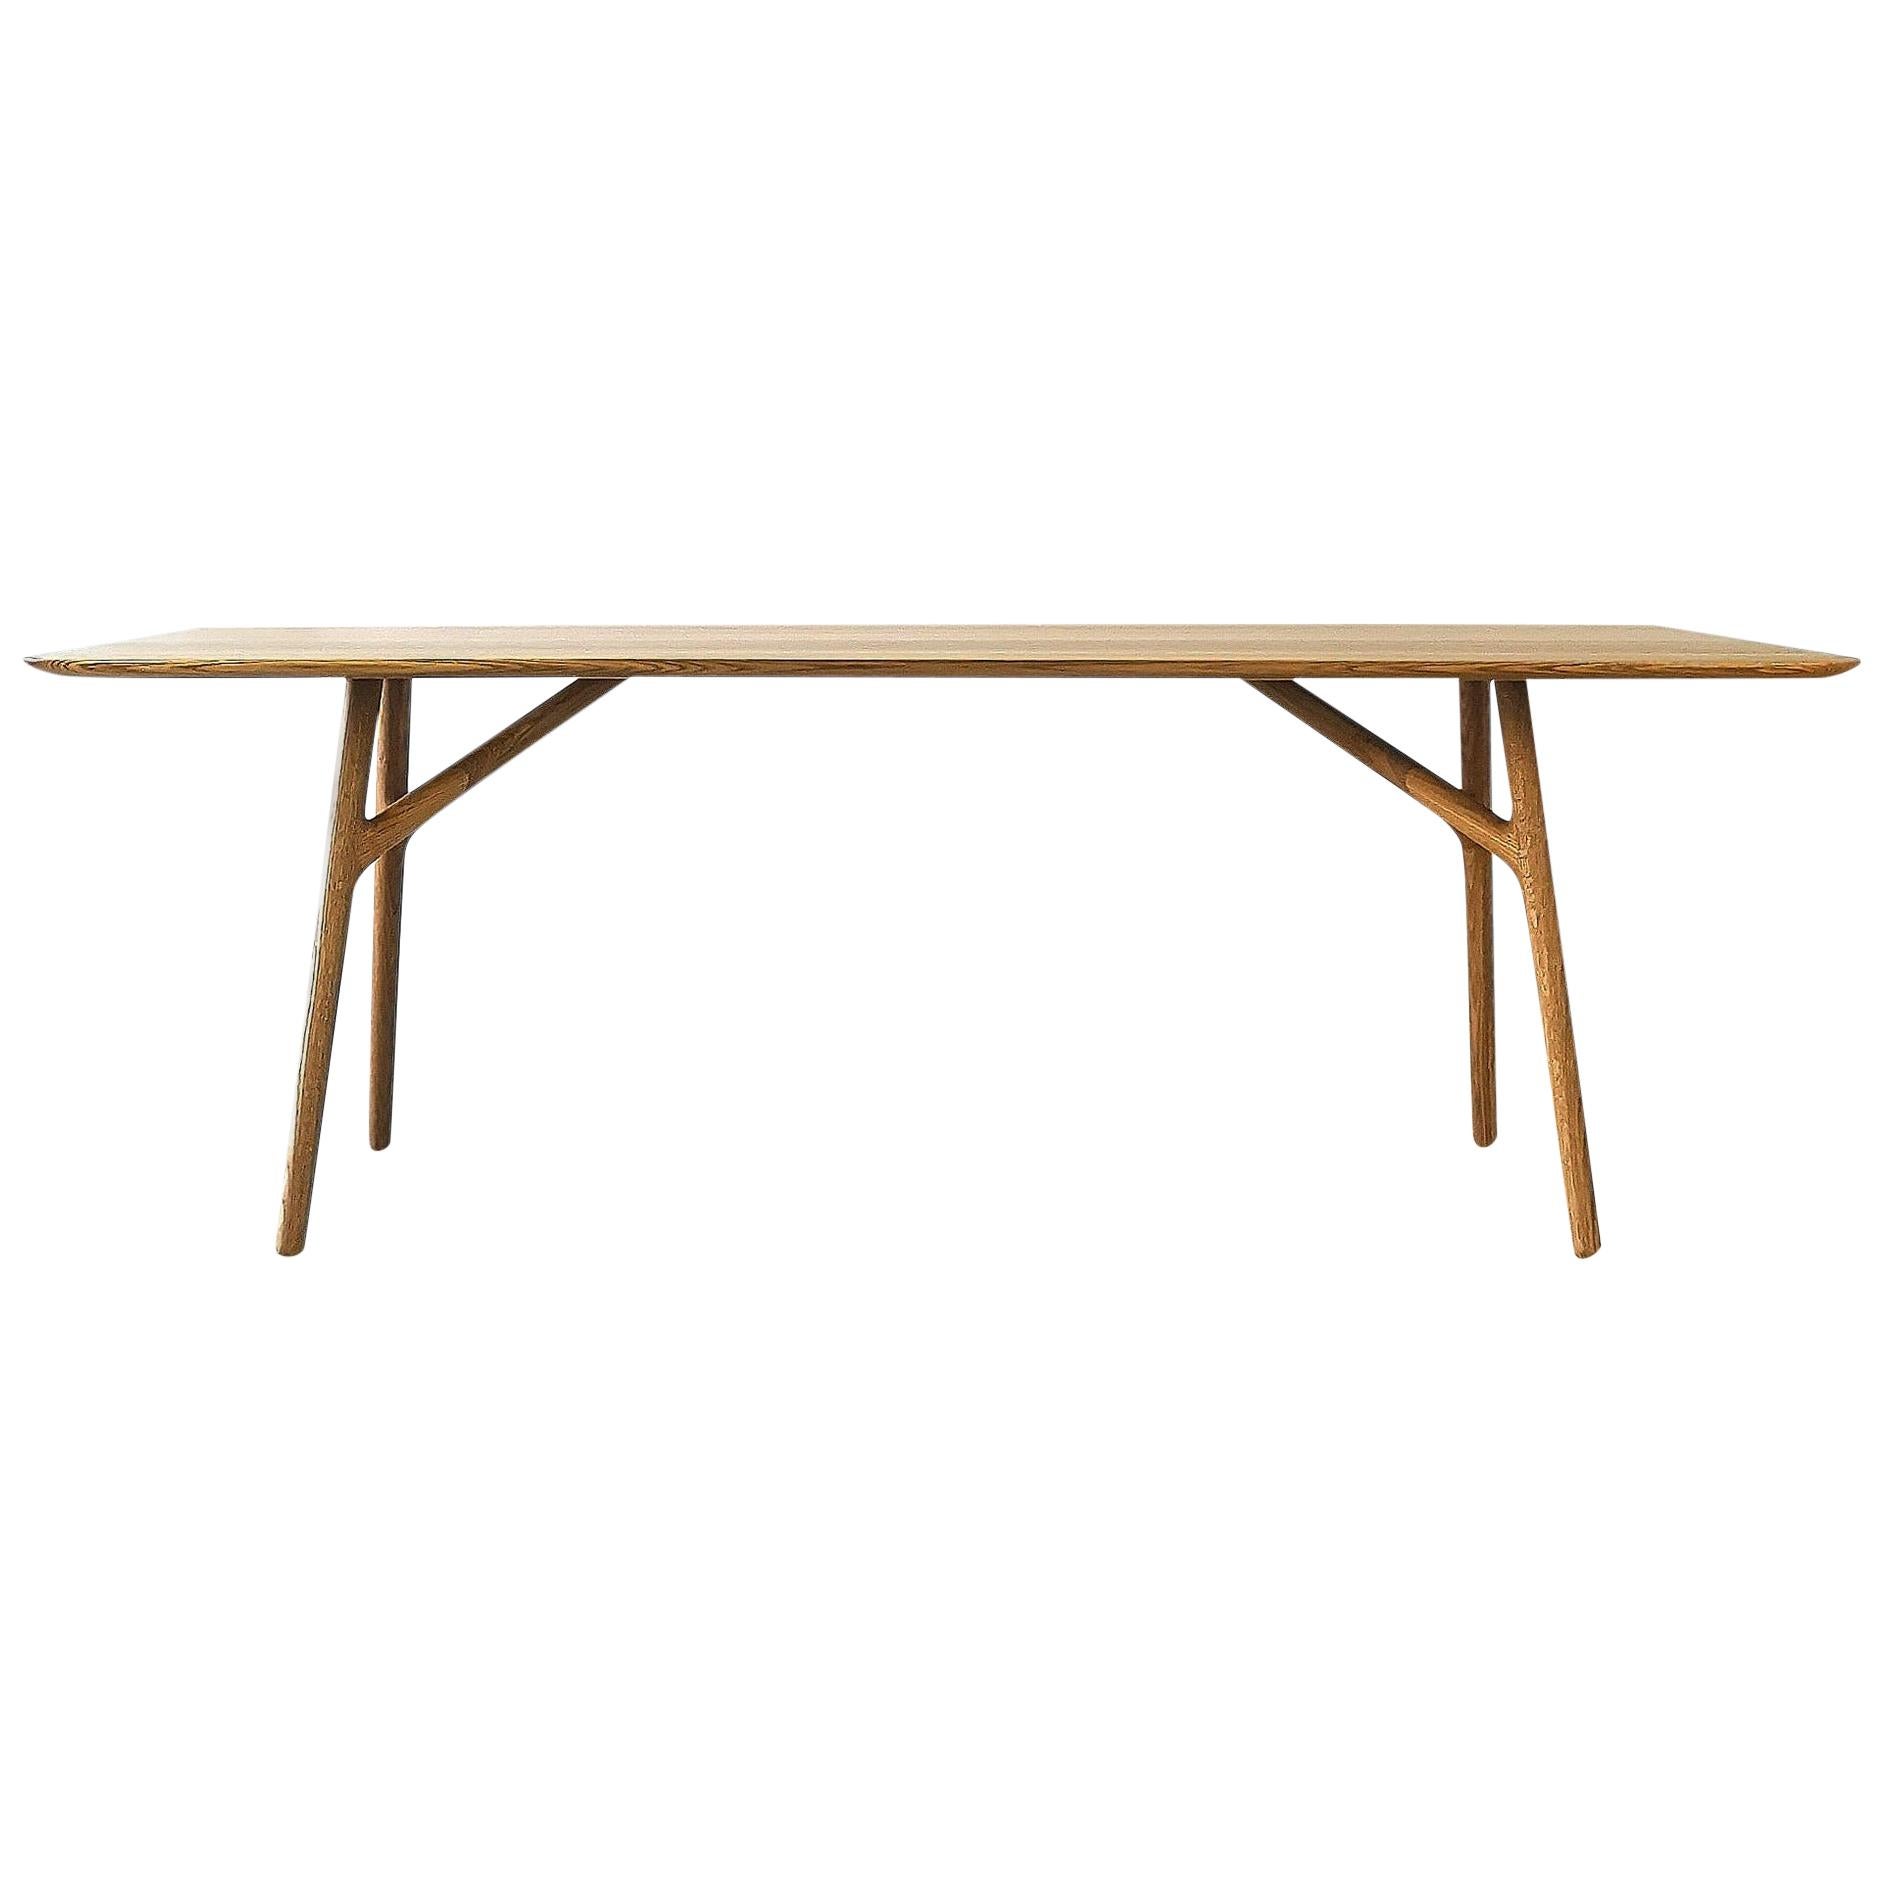 The Furcula by Izm Design is an elegantly handcrafted dining table featuring a sculpted 